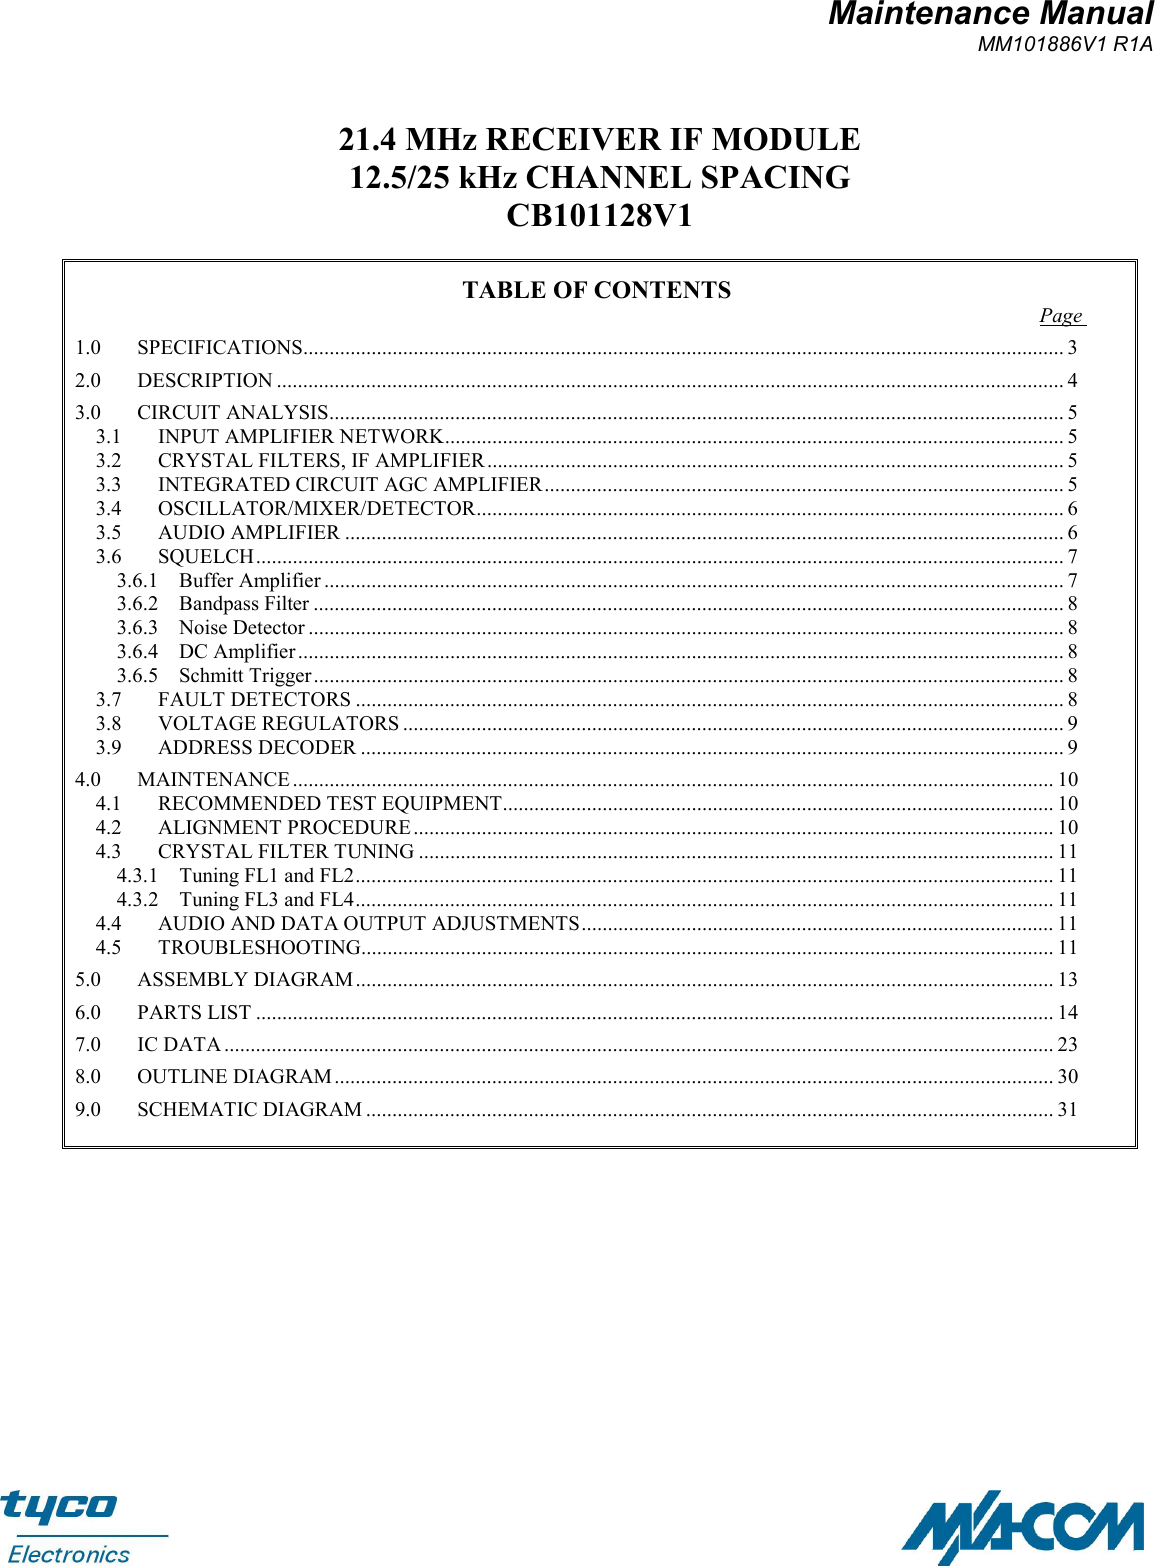 Maintenance ManualMM101886V1 R1A21.4 MHz RECEIVER IF MODULE12.5/25 kHz CHANNEL SPACINGCB101128V1TABLE OF CONTENTS Page 1.0 SPECIFICATIONS................................................................................................................................................. 32.0 DESCRIPTION ...................................................................................................................................................... 43.0 CIRCUIT ANALYSIS............................................................................................................................................ 53.1 INPUT AMPLIFIER NETWORK...................................................................................................................... 53.2 CRYSTAL FILTERS, IF AMPLIFIER.............................................................................................................. 53.3 INTEGRATED CIRCUIT AGC AMPLIFIER................................................................................................... 53.4 OSCILLATOR/MIXER/DETECTOR................................................................................................................ 63.5 AUDIO AMPLIFIER ......................................................................................................................................... 63.6 SQUELCH.......................................................................................................................................................... 73.6.1 Buffer Amplifier ............................................................................................................................................. 73.6.2 Bandpass Filter ............................................................................................................................................... 83.6.3 Noise Detector ................................................................................................................................................ 83.6.4 DC Amplifier .................................................................................................................................................. 83.6.5 Schmitt Trigger............................................................................................................................................... 83.7 FAULT DETECTORS ....................................................................................................................................... 83.8 VOLTAGE REGULATORS .............................................................................................................................. 93.9 ADDRESS DECODER ...................................................................................................................................... 94.0 MAINTENANCE ................................................................................................................................................. 104.1 RECOMMENDED TEST EQUIPMENT......................................................................................................... 104.2 ALIGNMENT PROCEDURE.......................................................................................................................... 104.3 CRYSTAL FILTER TUNING ......................................................................................................................... 114.3.1 Tuning FL1 and FL2..................................................................................................................................... 114.3.2 Tuning FL3 and FL4..................................................................................................................................... 114.4 AUDIO AND DATA OUTPUT ADJUSTMENTS.......................................................................................... 114.5 TROUBLESHOOTING.................................................................................................................................... 115.0 ASSEMBLY DIAGRAM..................................................................................................................................... 136.0 PARTS LIST ........................................................................................................................................................ 147.0 IC DATA .............................................................................................................................................................. 238.0 OUTLINE DIAGRAM......................................................................................................................................... 309.0 SCHEMATIC DIAGRAM ................................................................................................................................... 31